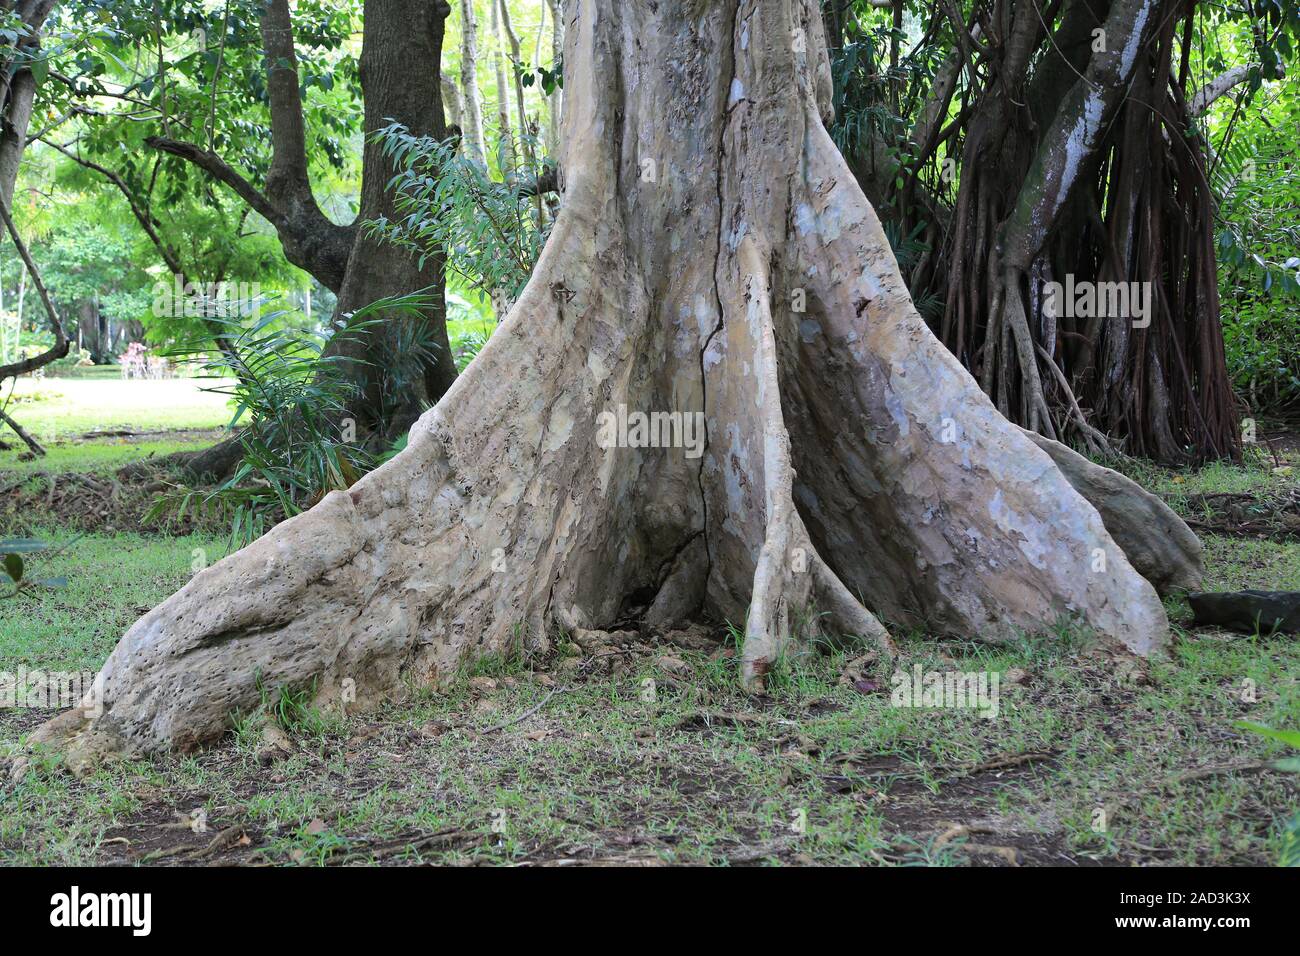 Mauritius, Botanical Garden, Tropical Forest, Tree roots Stock Photo